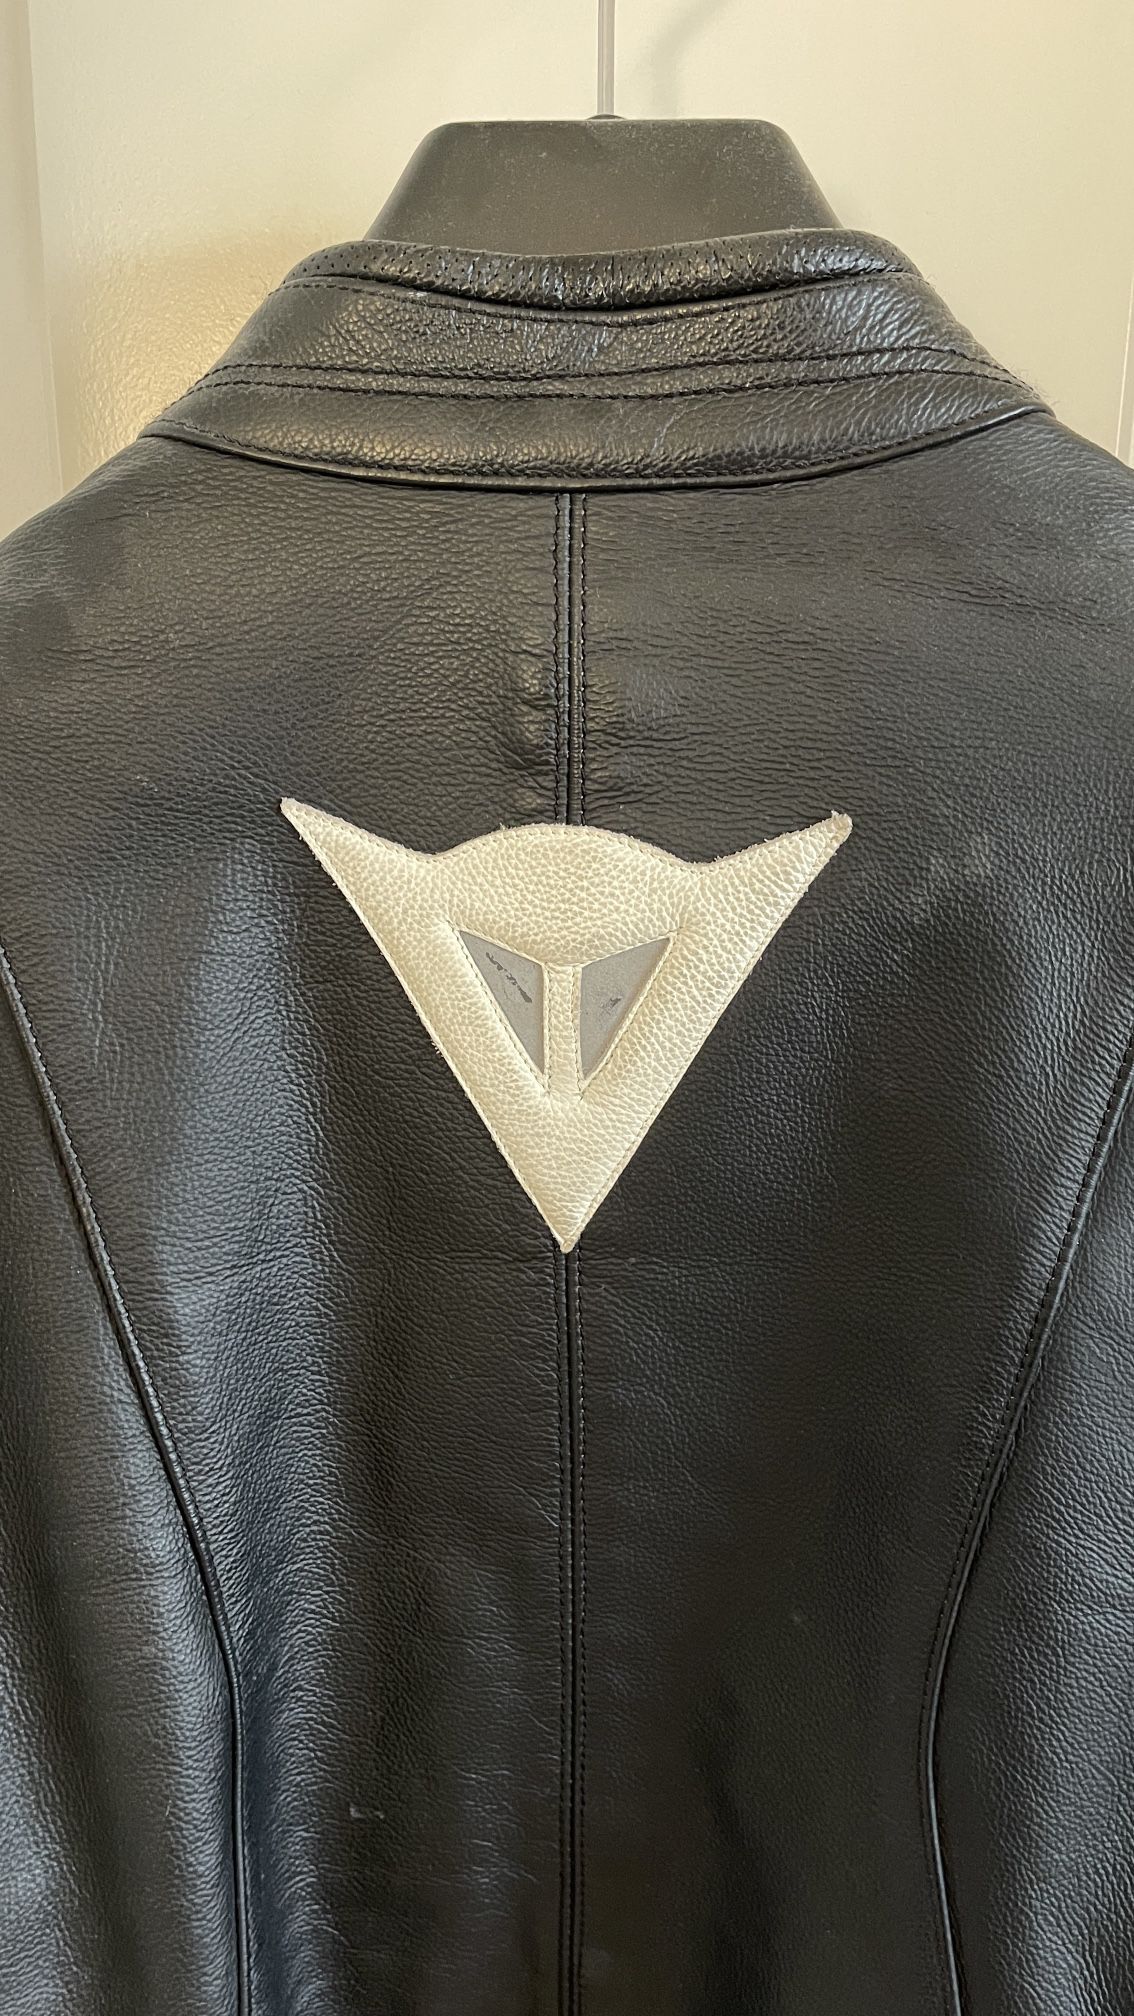 Dainese Leather Jacket (Size 54 - Rashed) for Sale in Westminster, CA ...